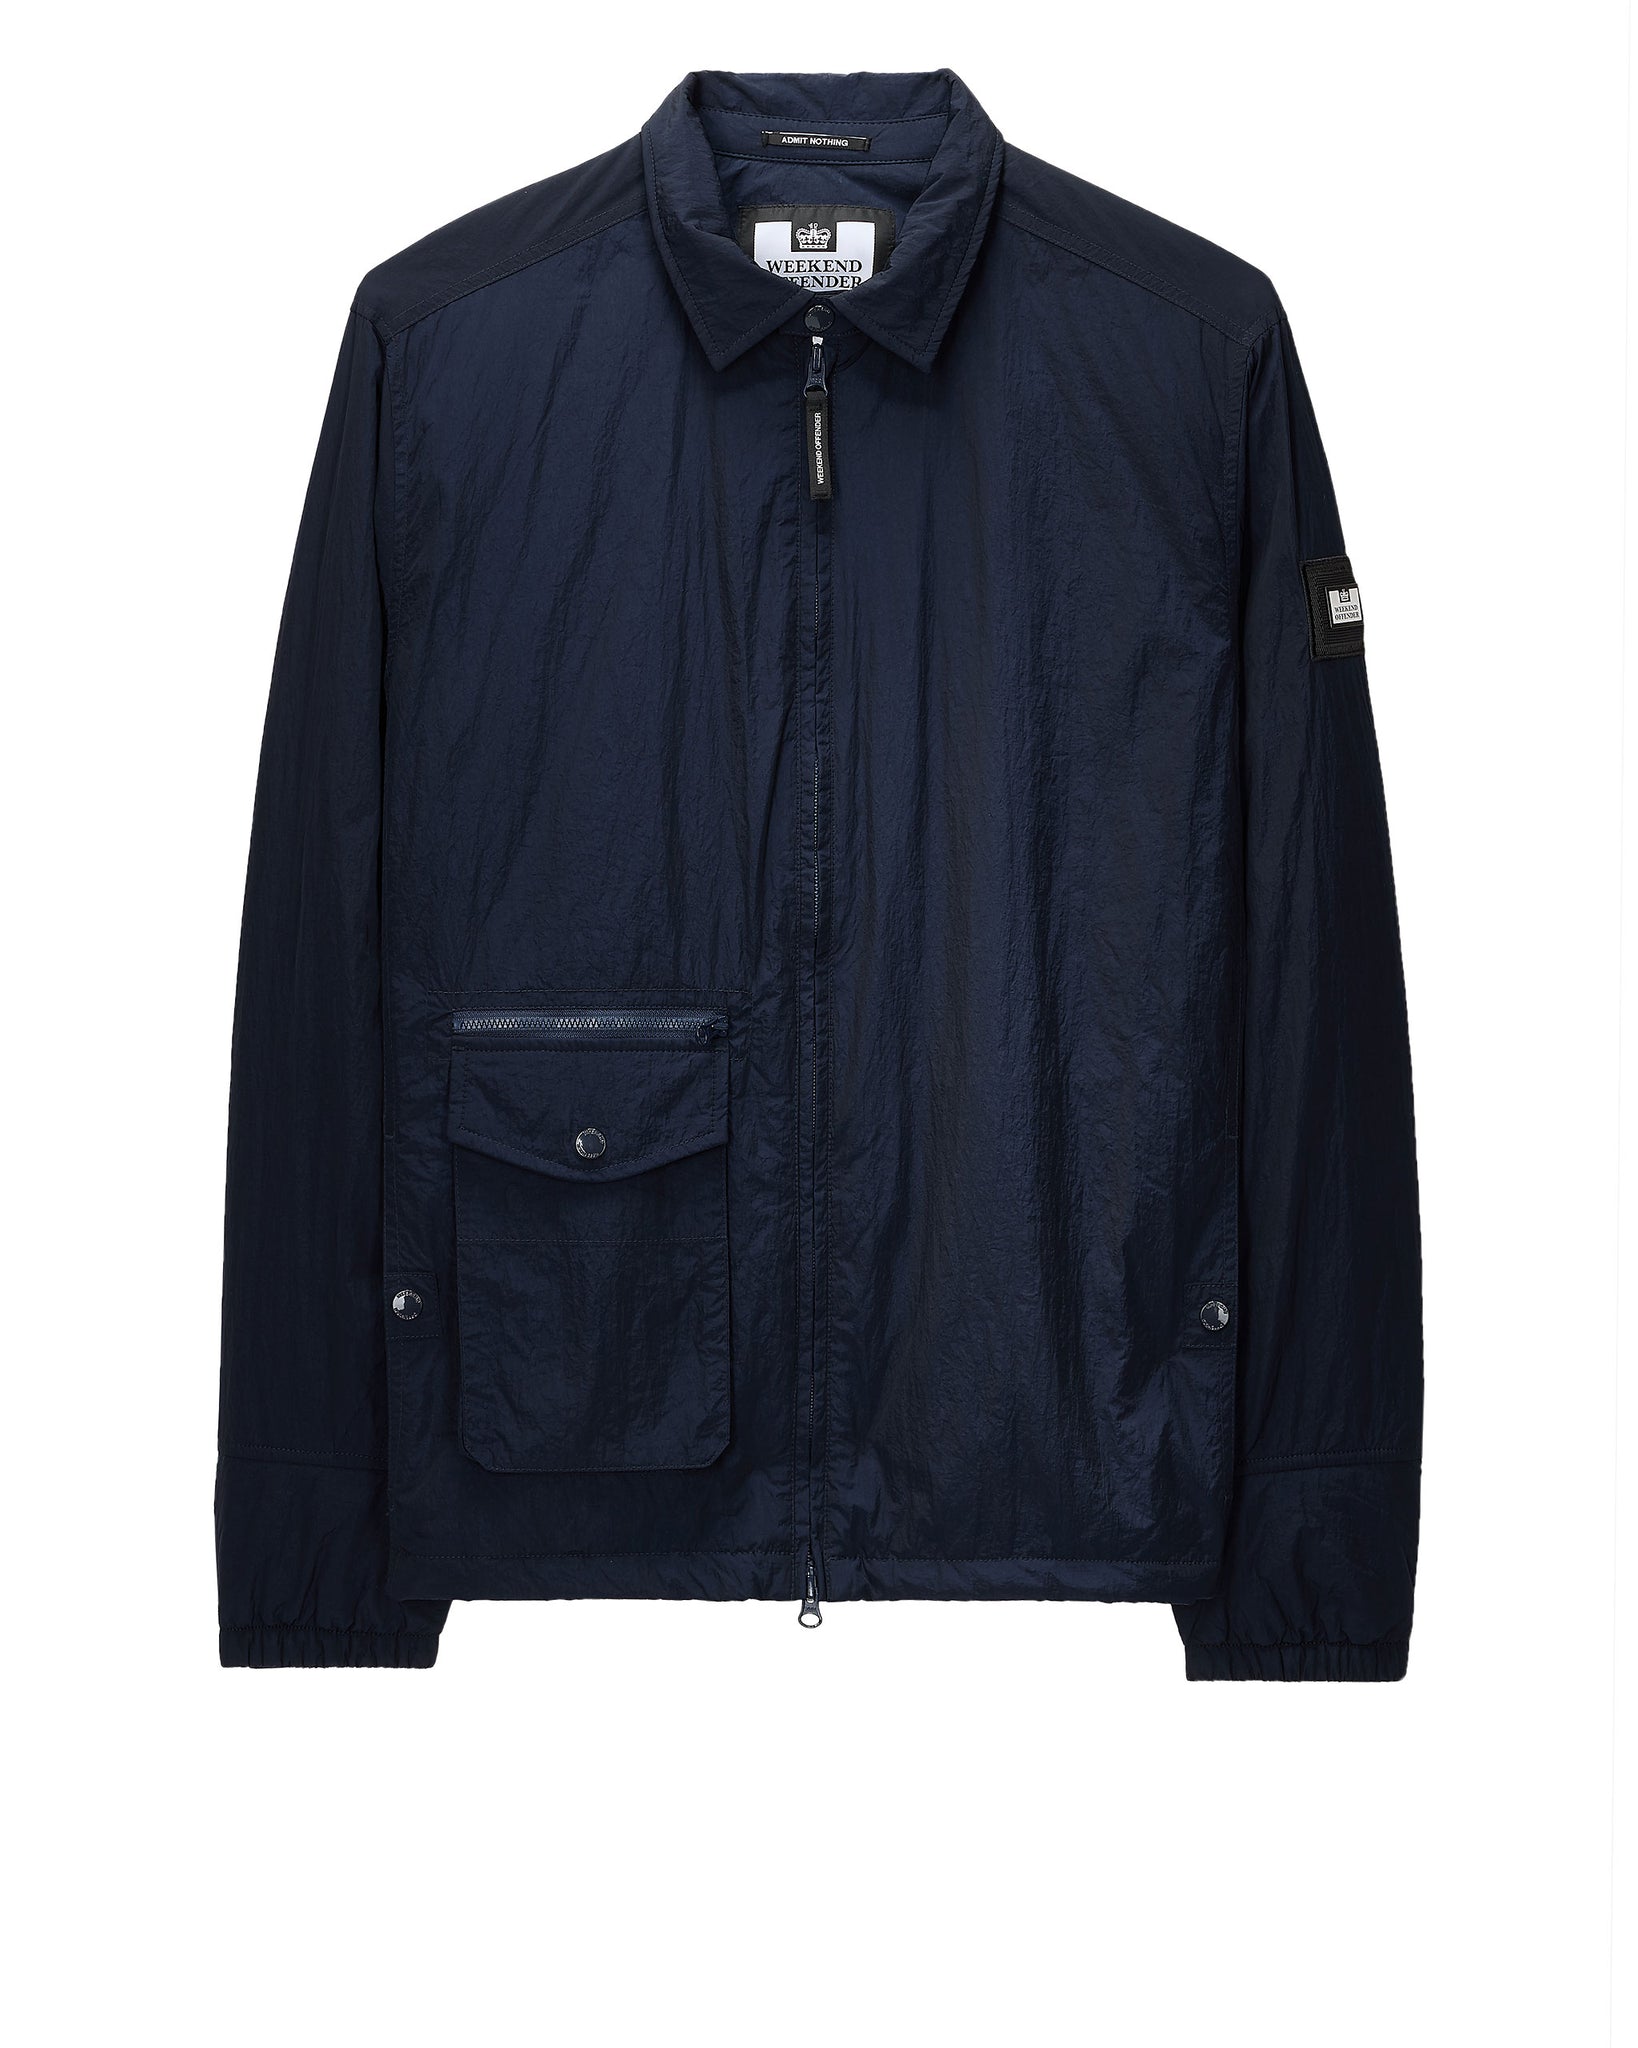 Vinnie Thermo Over-Shirt Navy